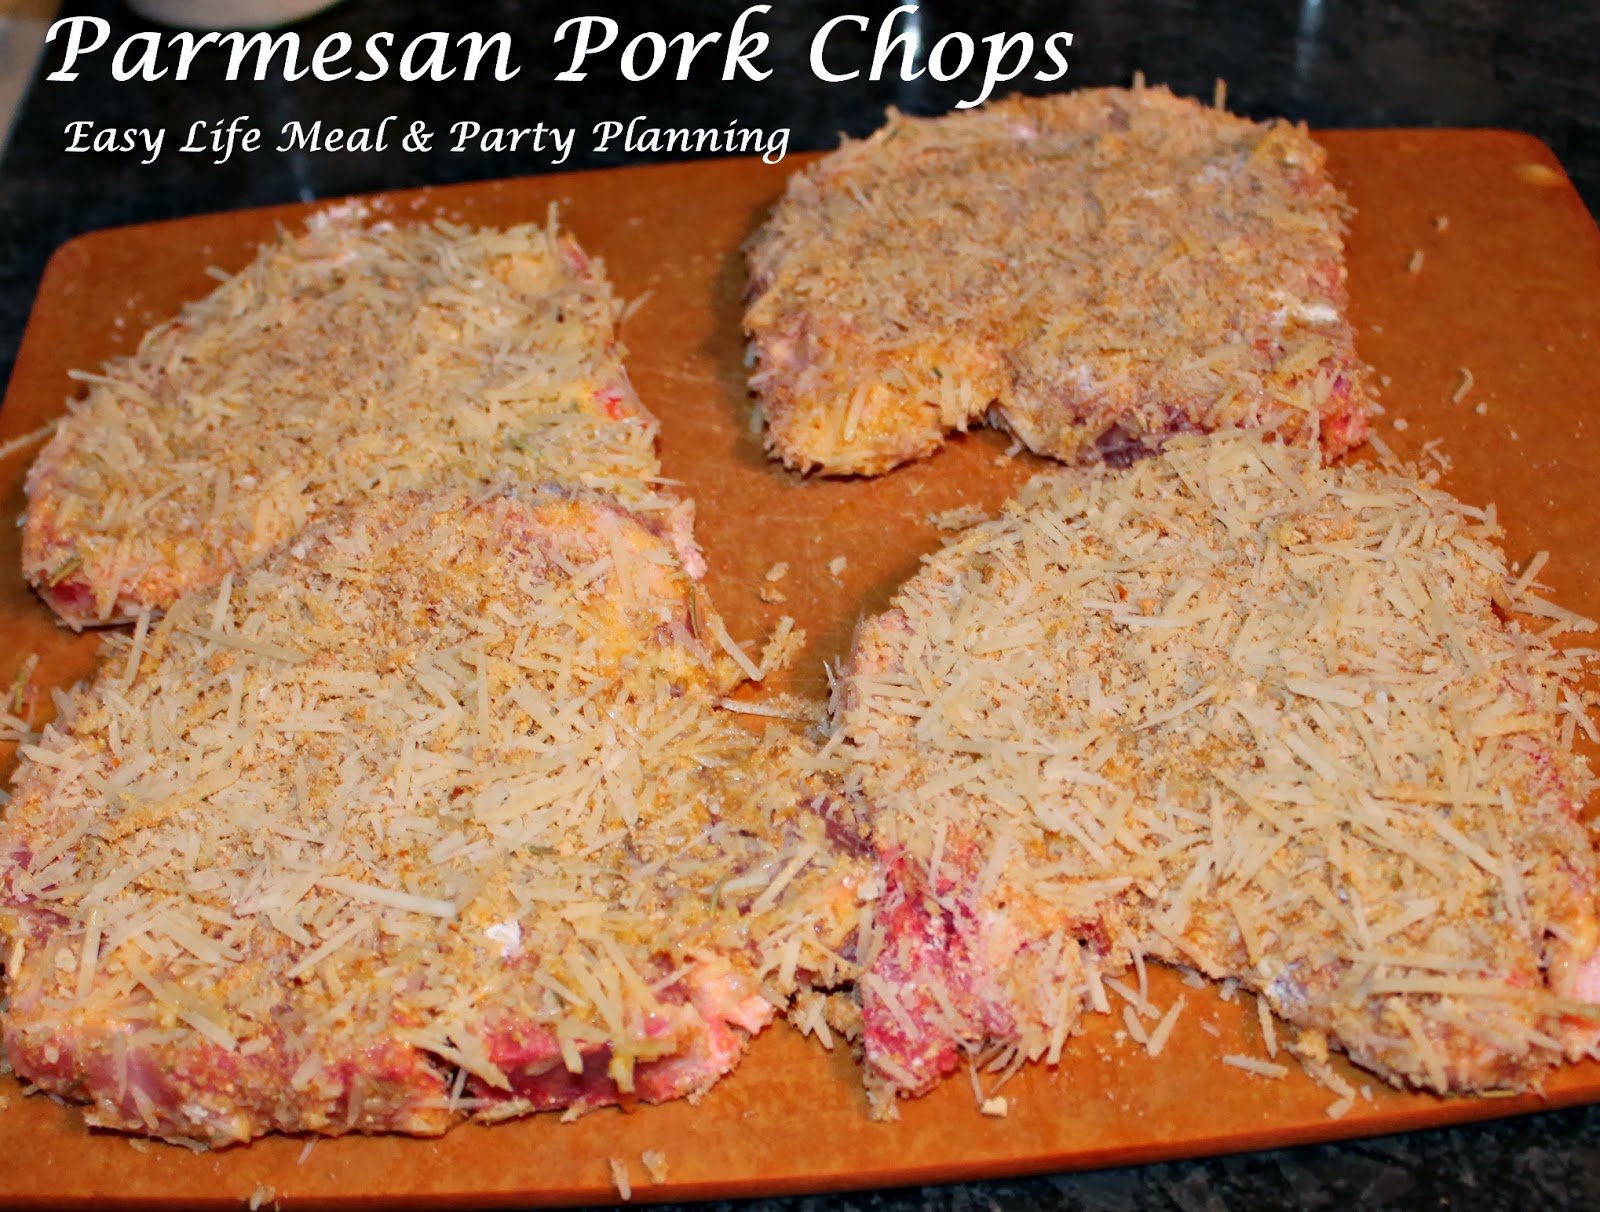 Parmesan Encrusted Pork Chops - Easy Life Meal & Party Planning - A super easy, quick and tasty meal. Start to finish in less than 30 minutes!